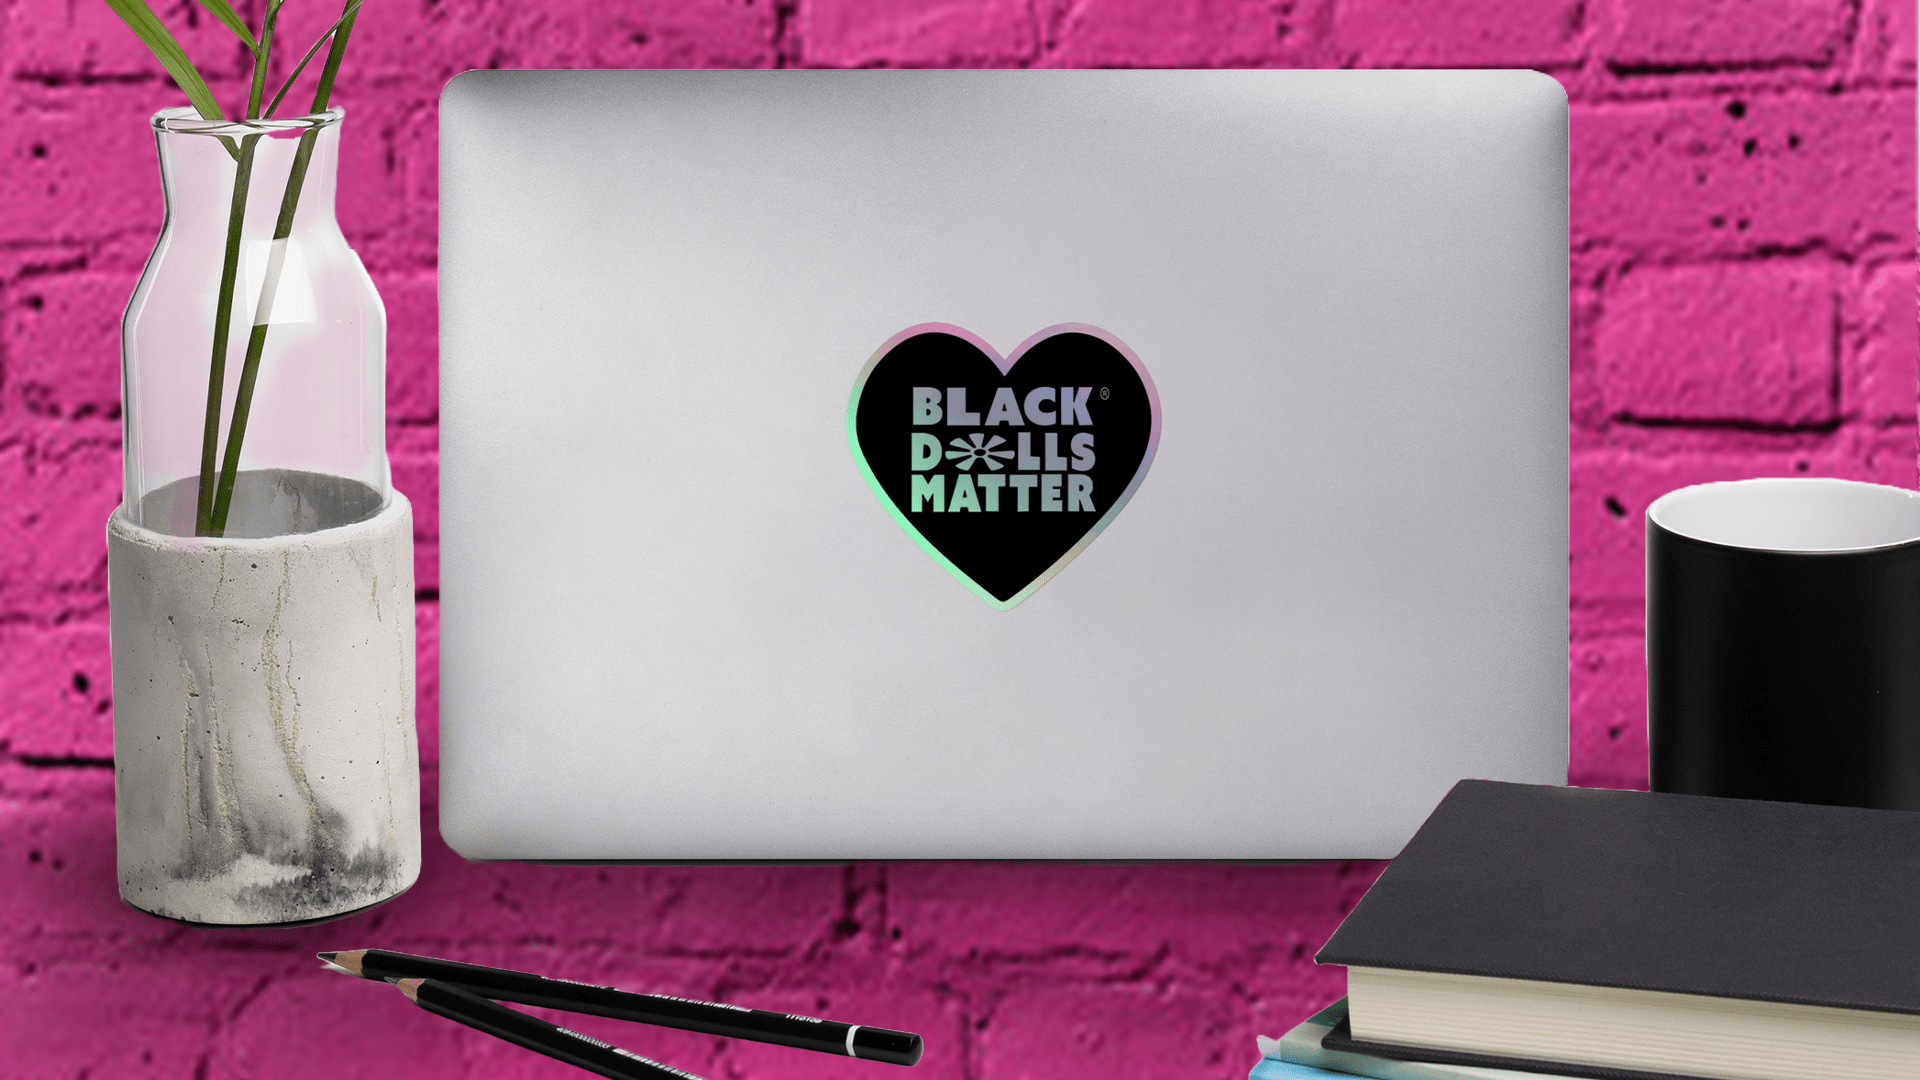 Black Dolls Matter® is a brand that promotes the recognition and representation of children of color through a diverse selection of dolls., HOME, BLACK DOLLS MATTER